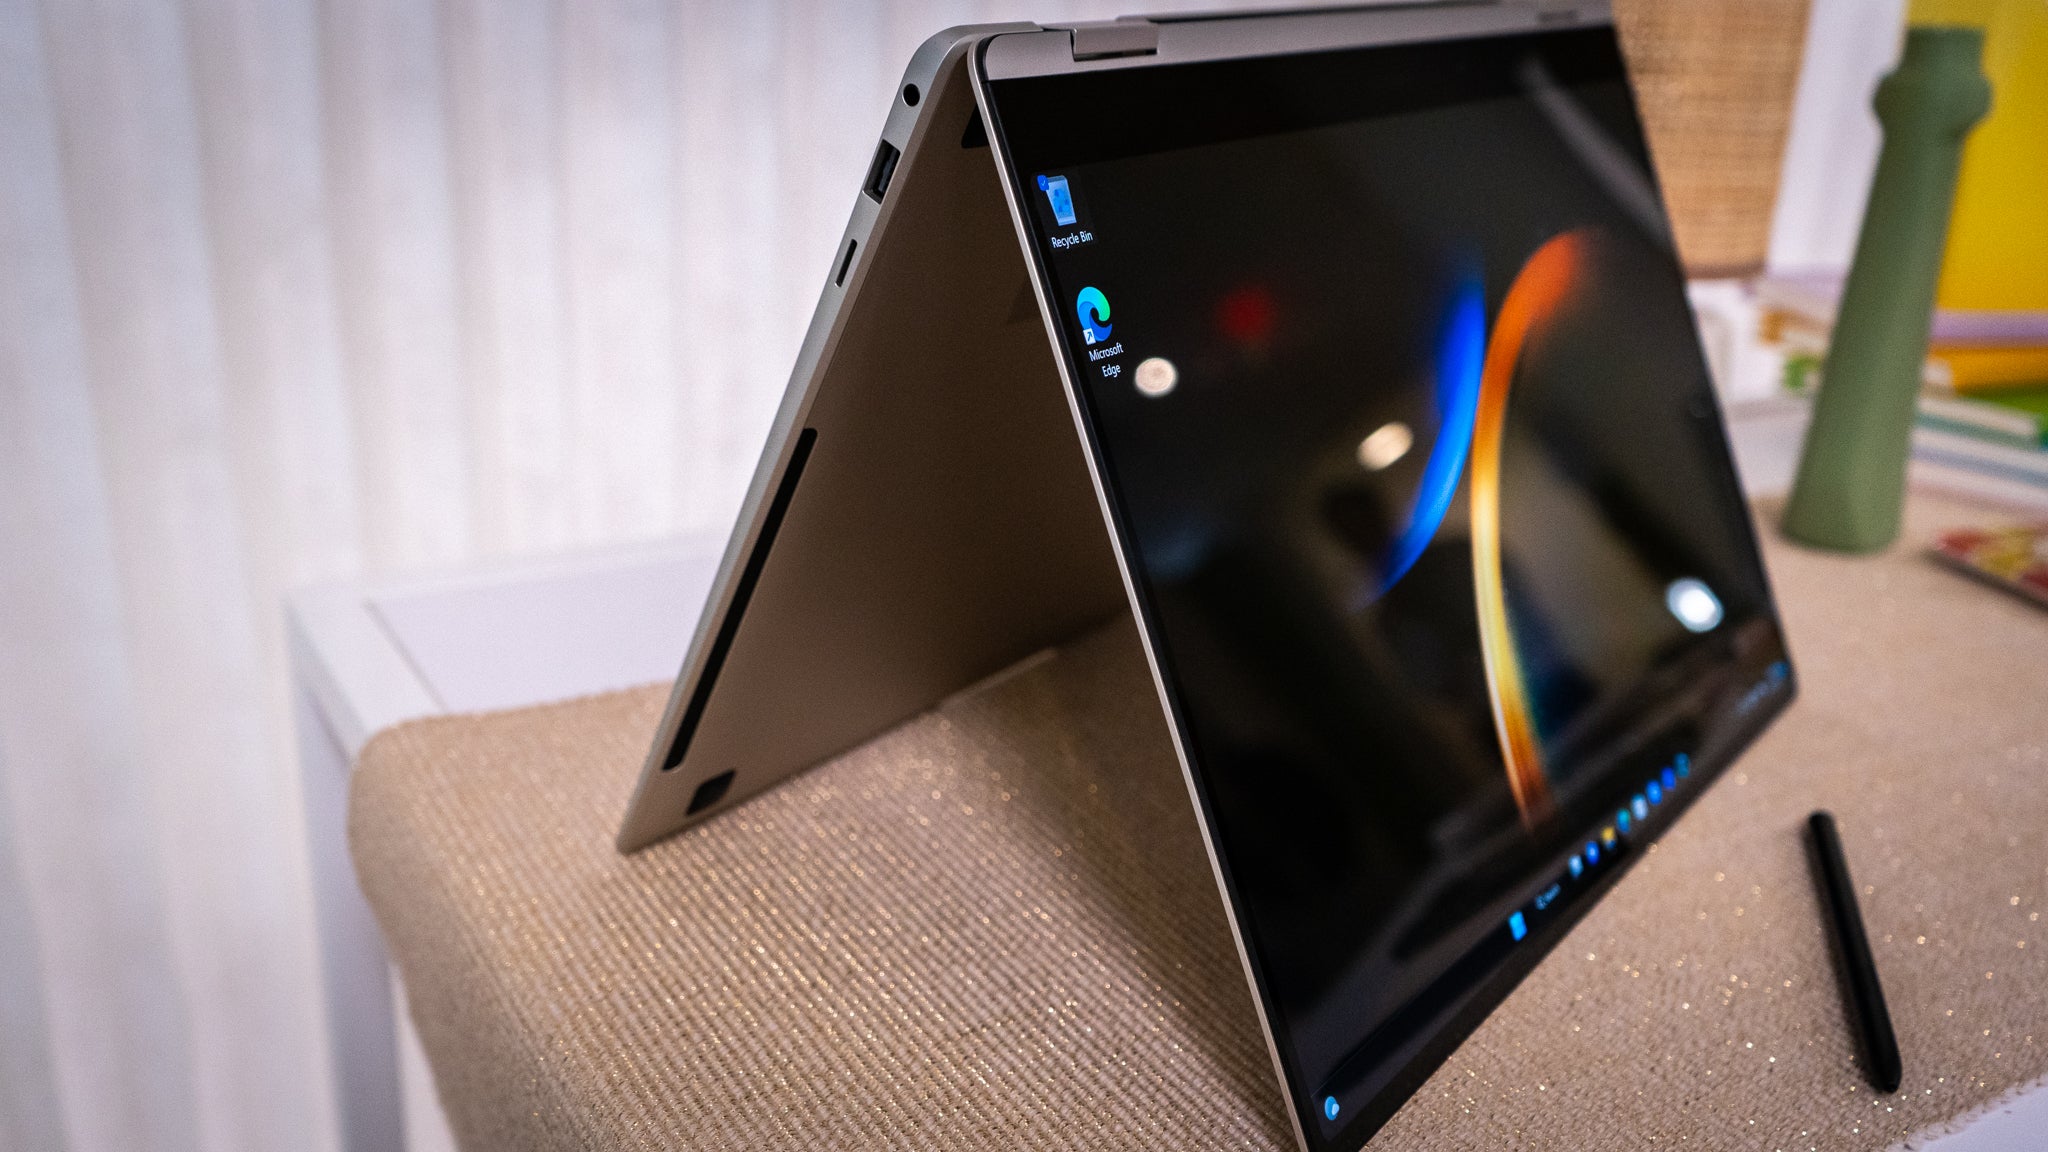 The Galaxy Book 3 Pro 360 folds backward into a tablet.  (Photo: Florence Ion / Gizmodo)